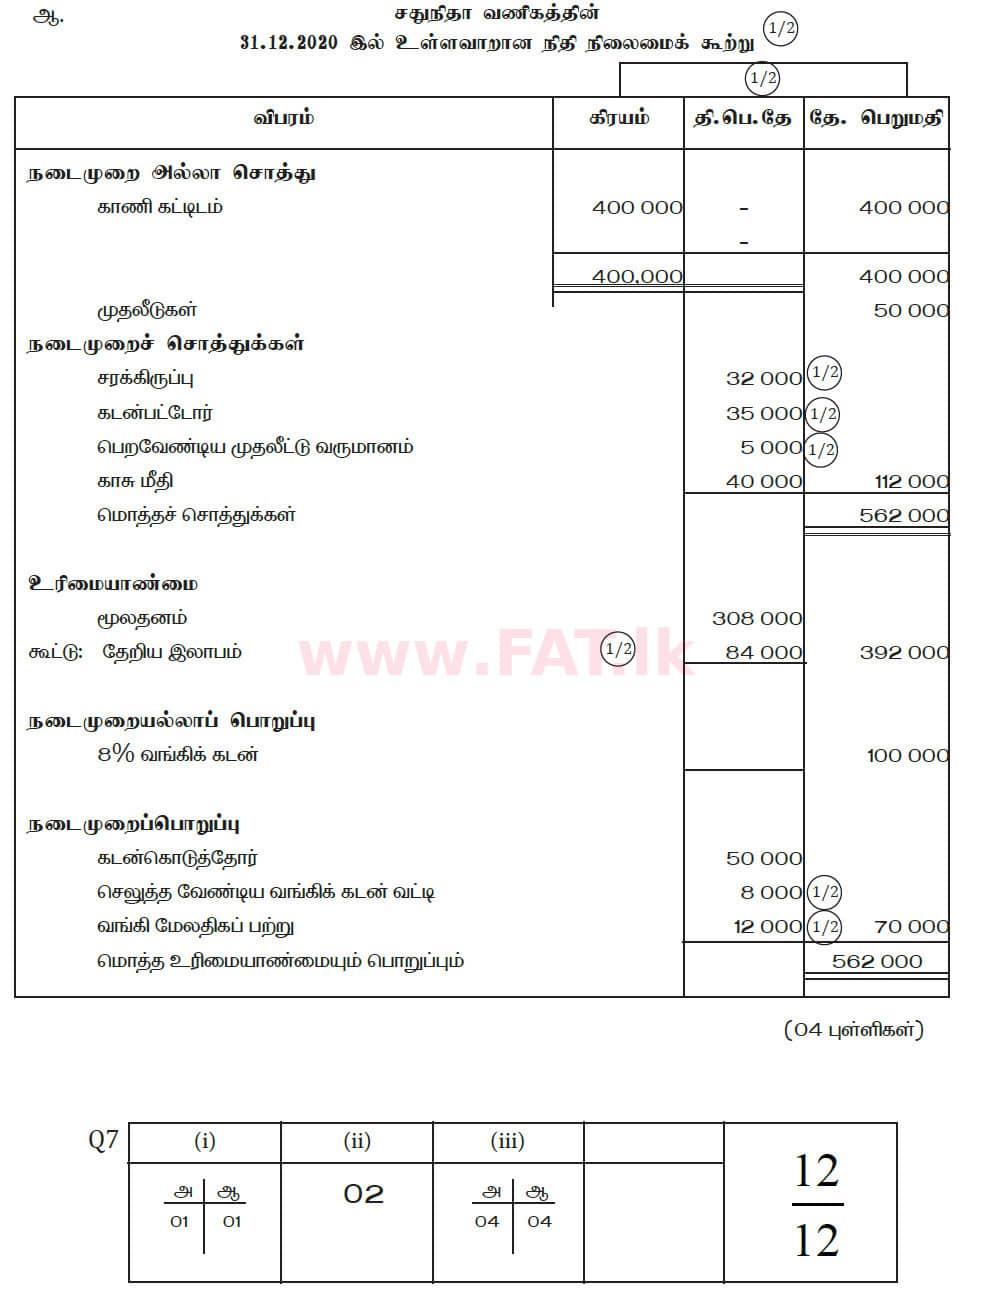 National Syllabus : Ordinary Level (O/L) Business and Accounting Studies - 2020 March - Paper II (தமிழ் Medium) 7 5790